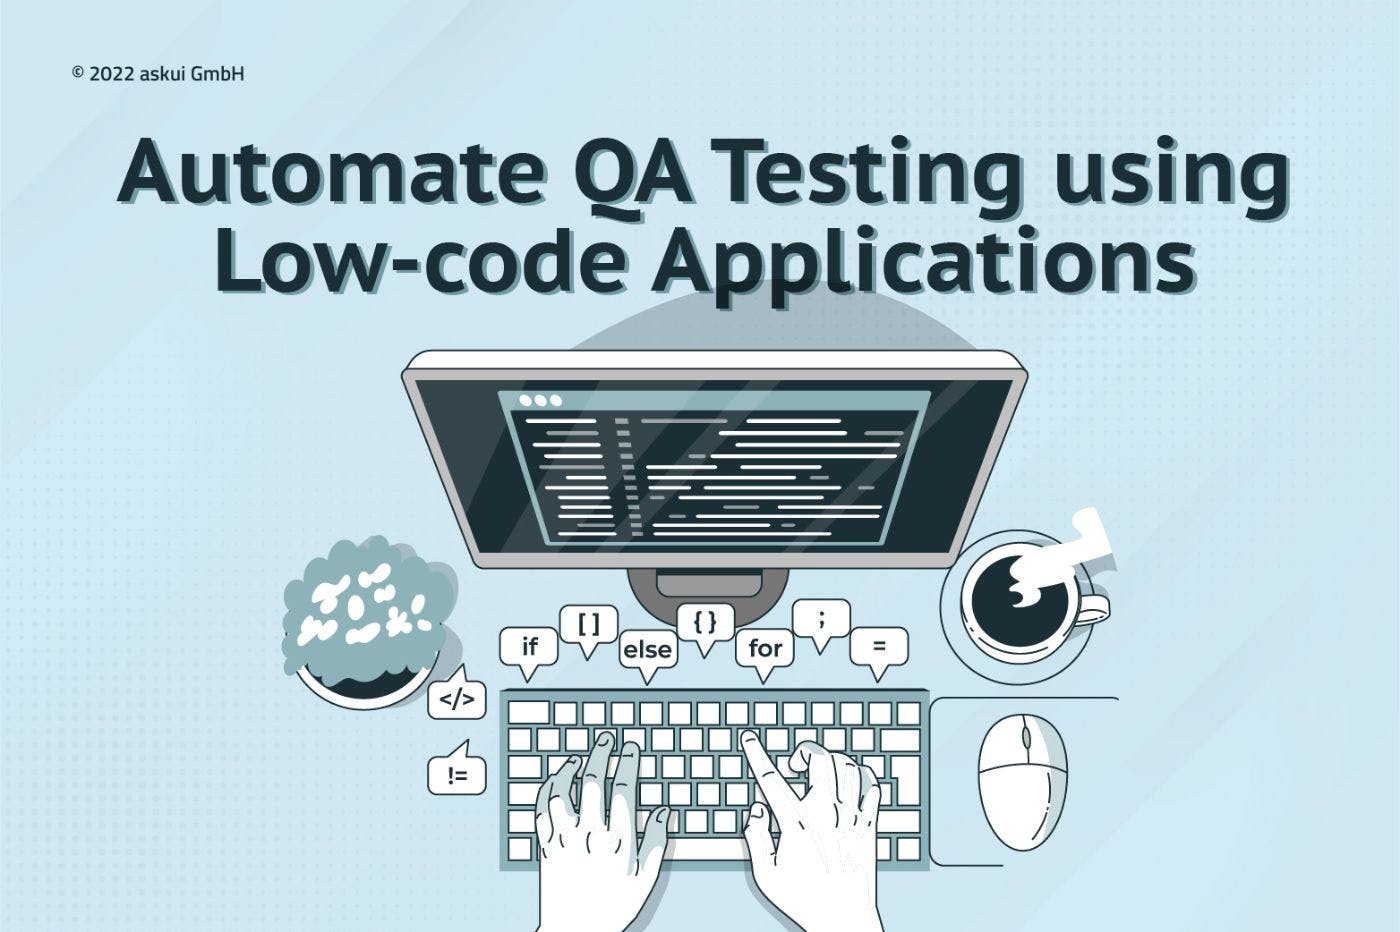 featured image - Automated QA Testing with Low-code Applications 